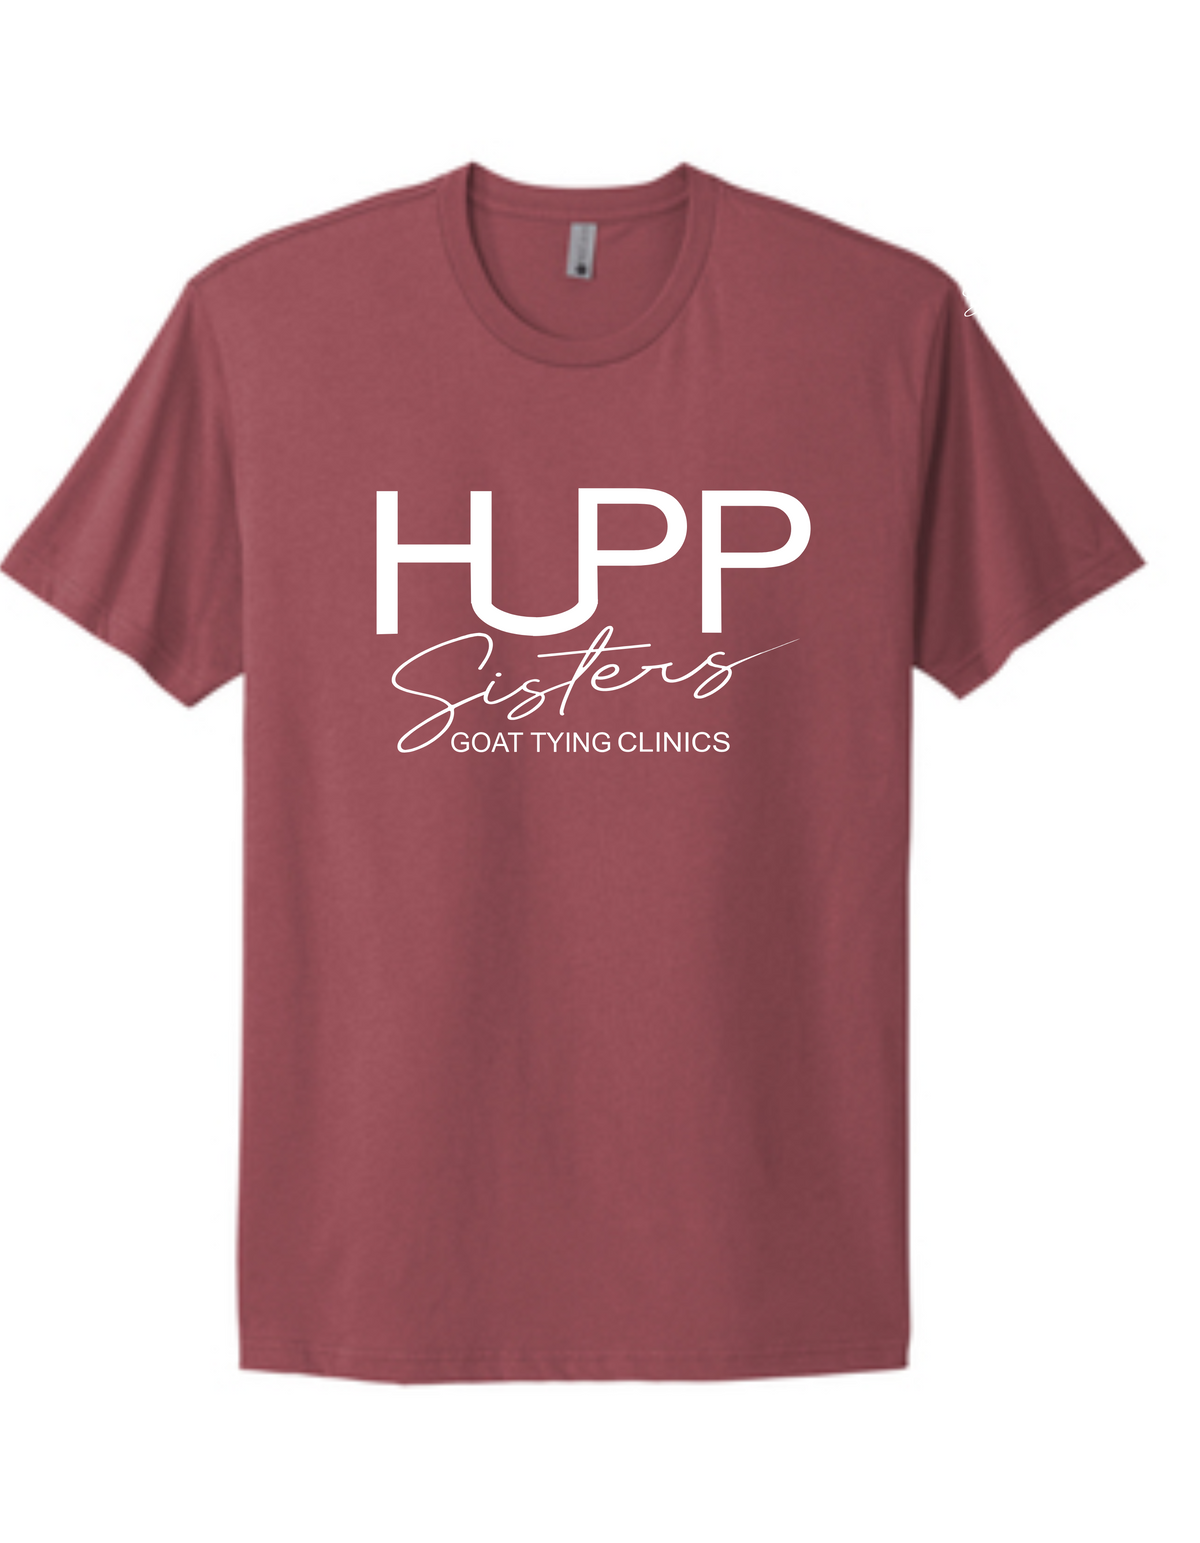 Hupp Sisters Infant, Toddler & Youth T-Shirt